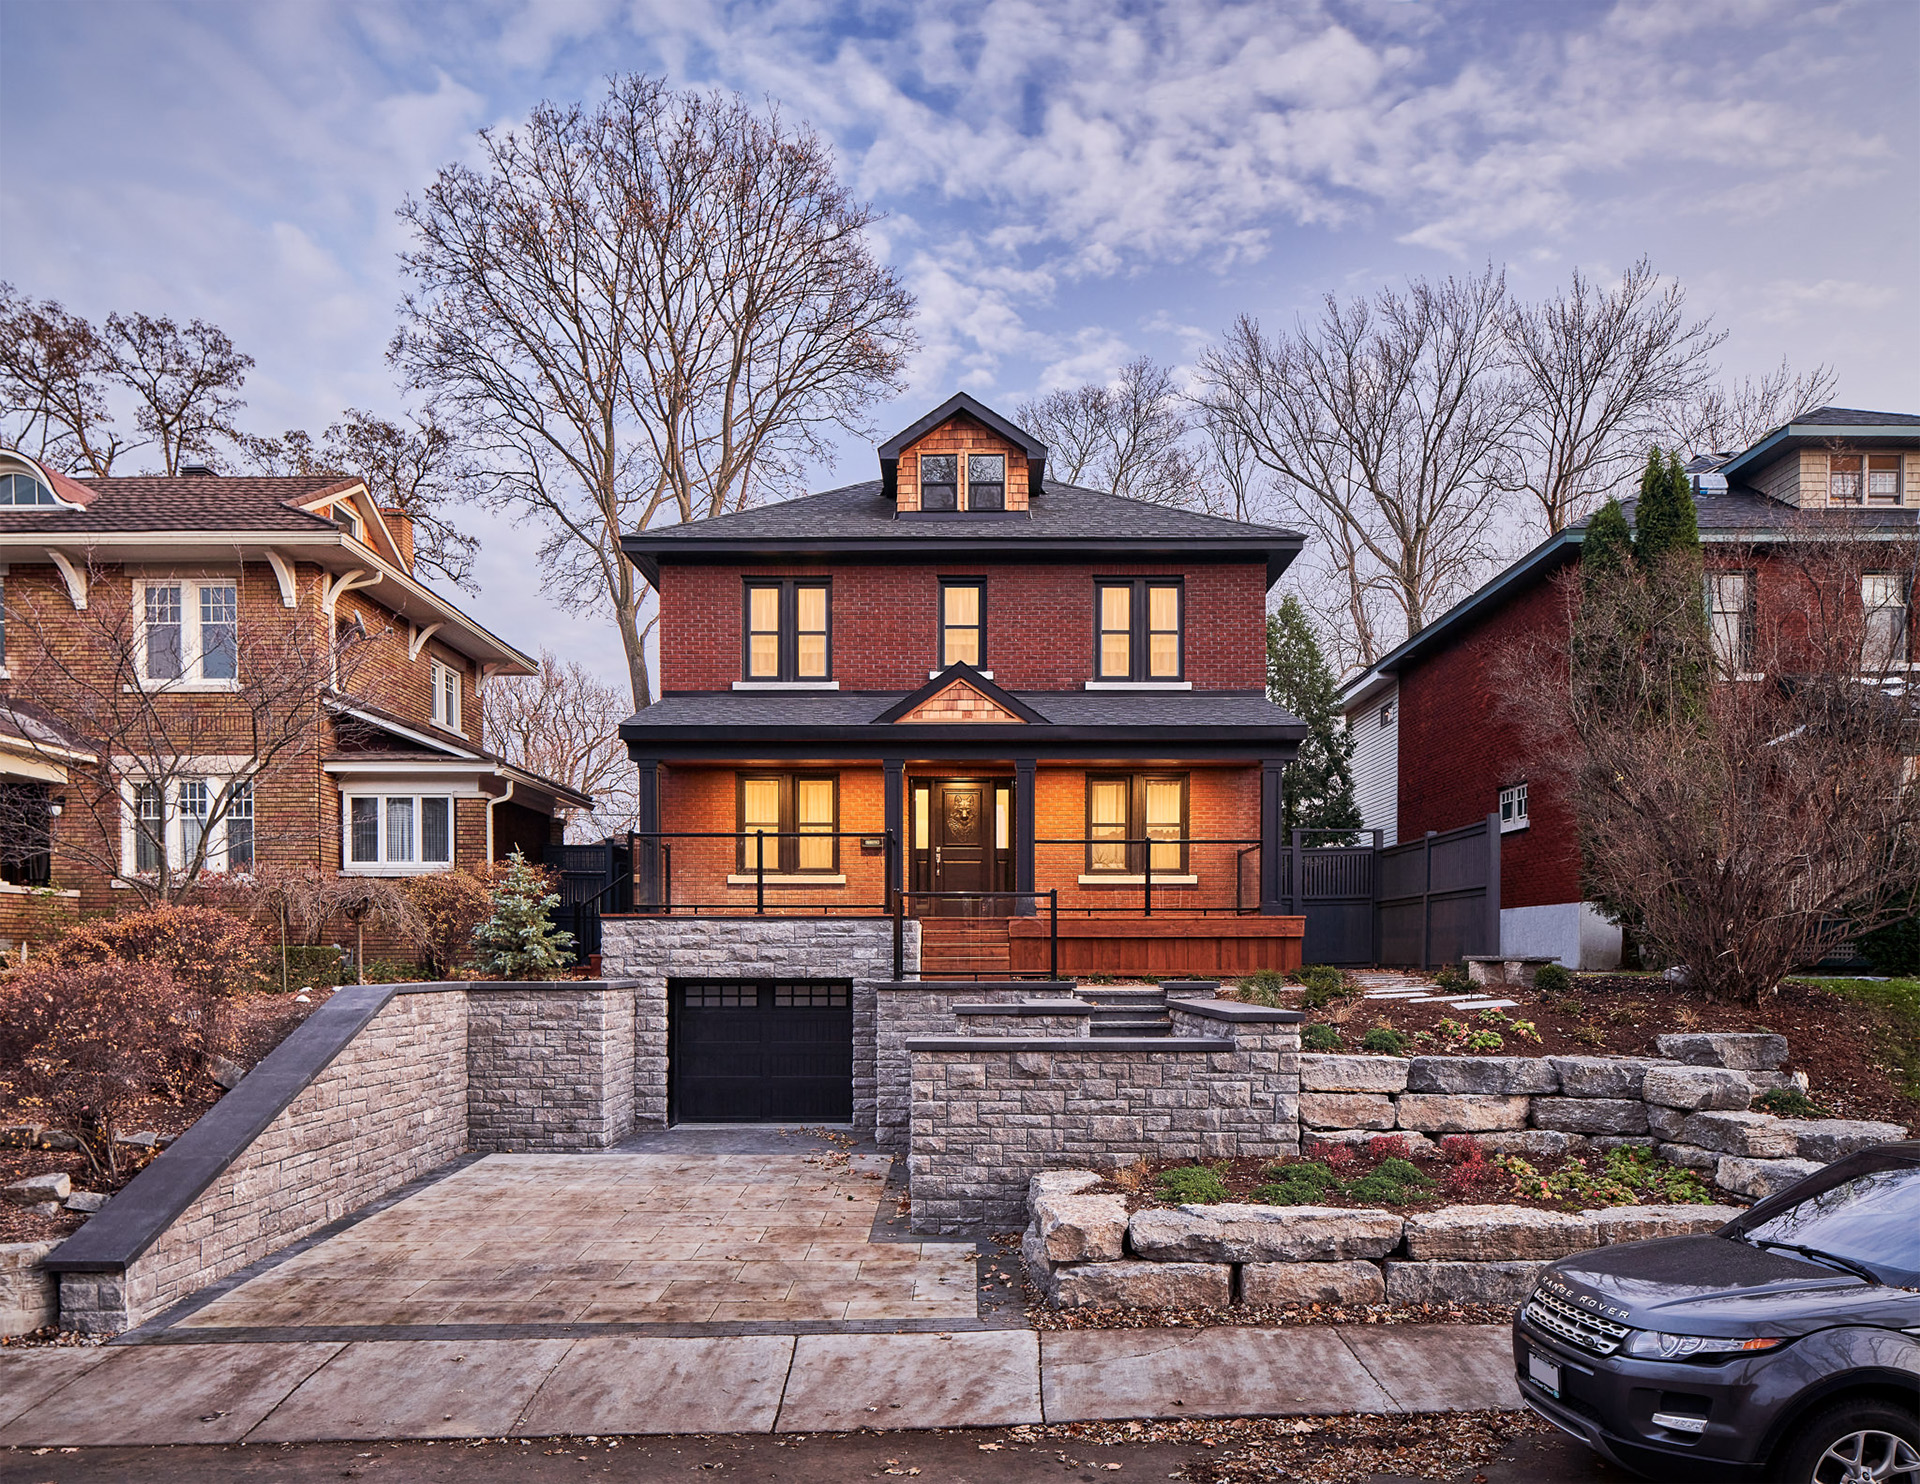 Renovated two-story brick home with a black garage door and stone landscaping, part of the Broadway Renovation project